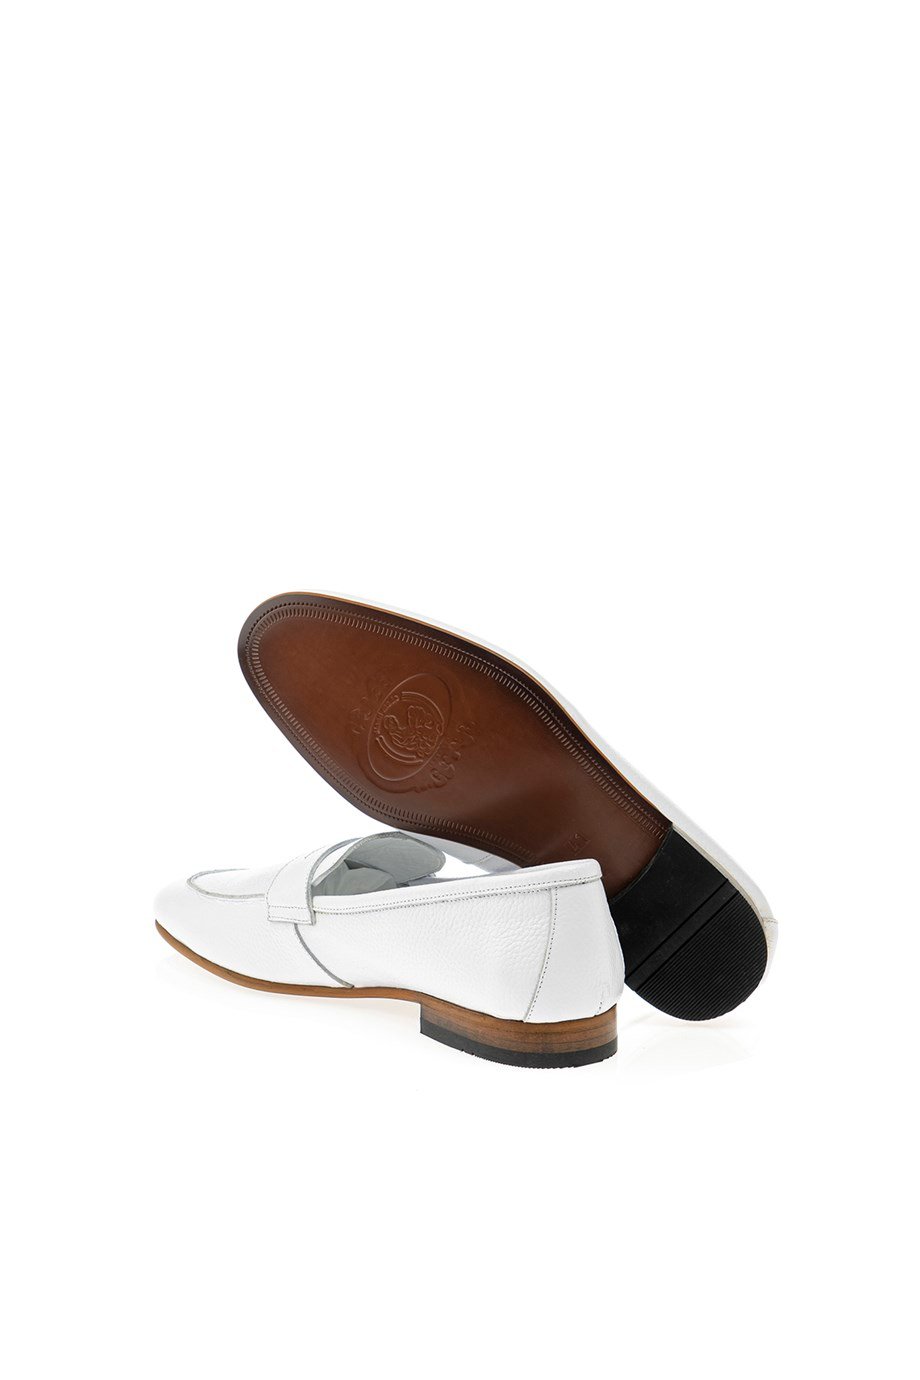 White Grainy penny Loafer